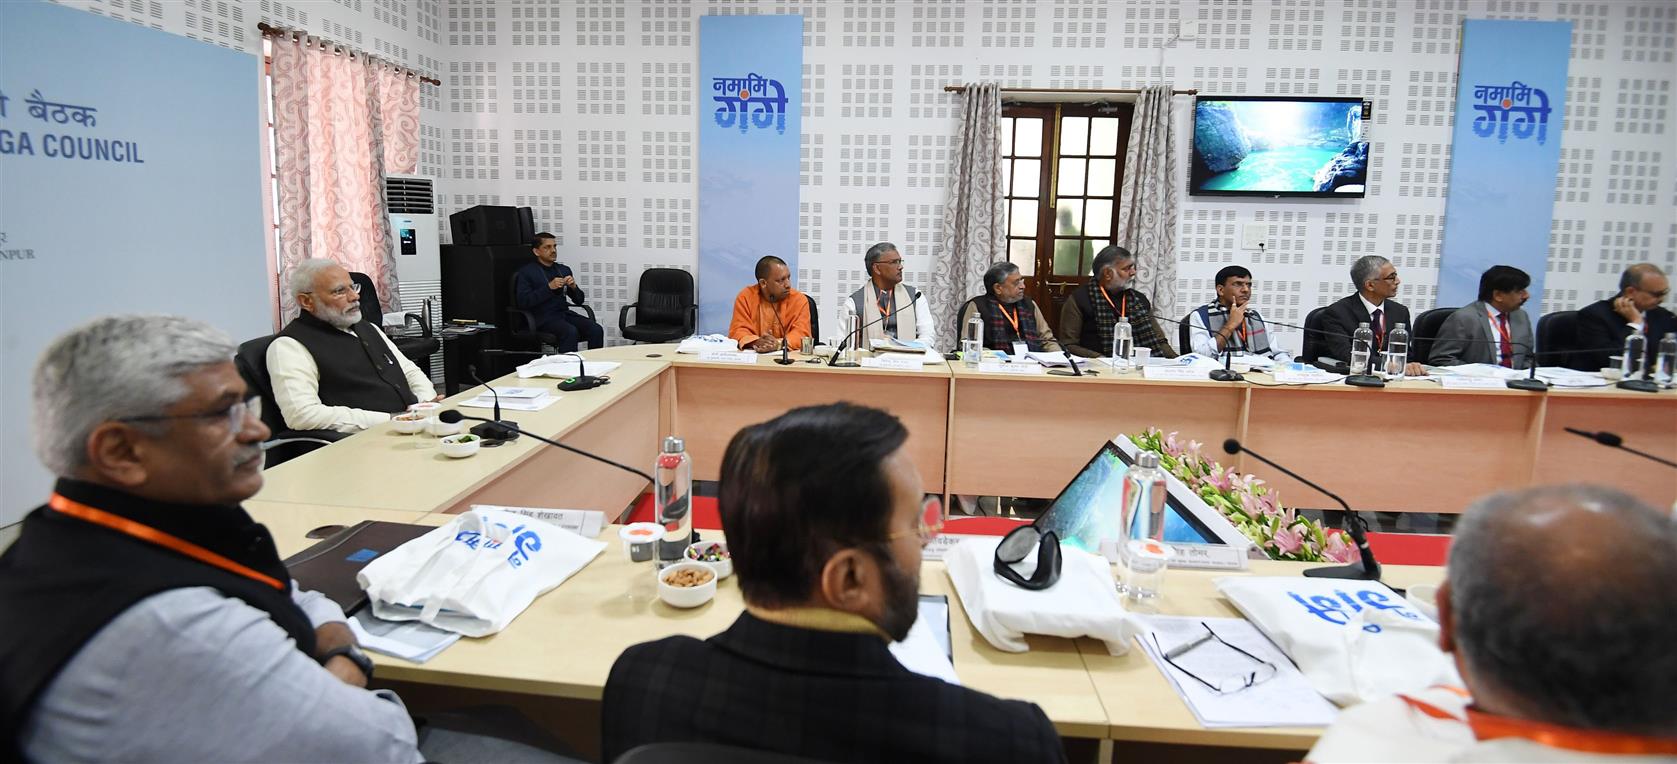 The Prime Minister, Shri Narendra Modi attends the Ganga Council Meeting, in Kanpur on December 14, 2019.